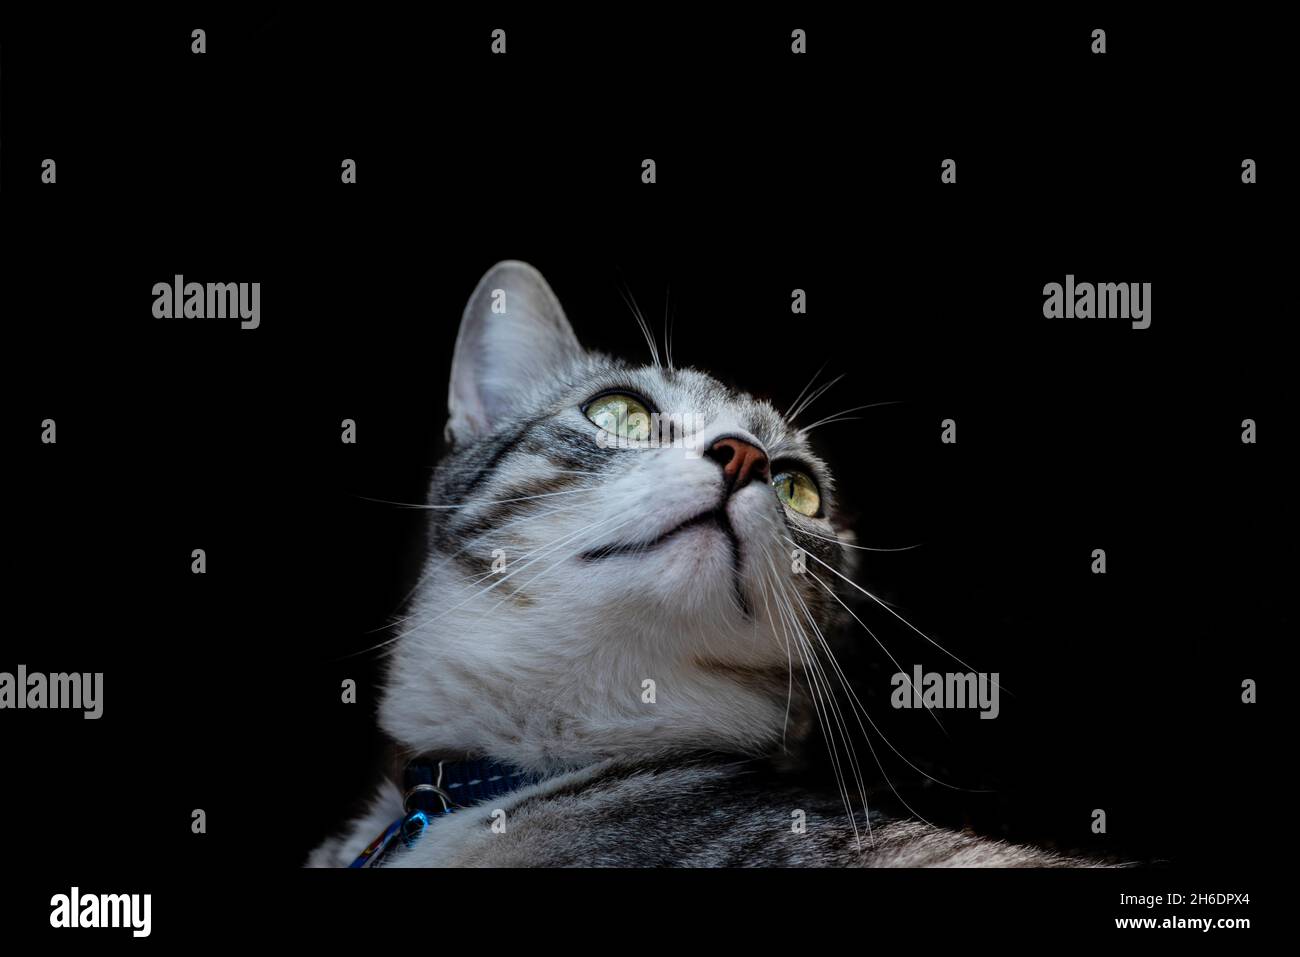 Cat against a black background Stock Photo